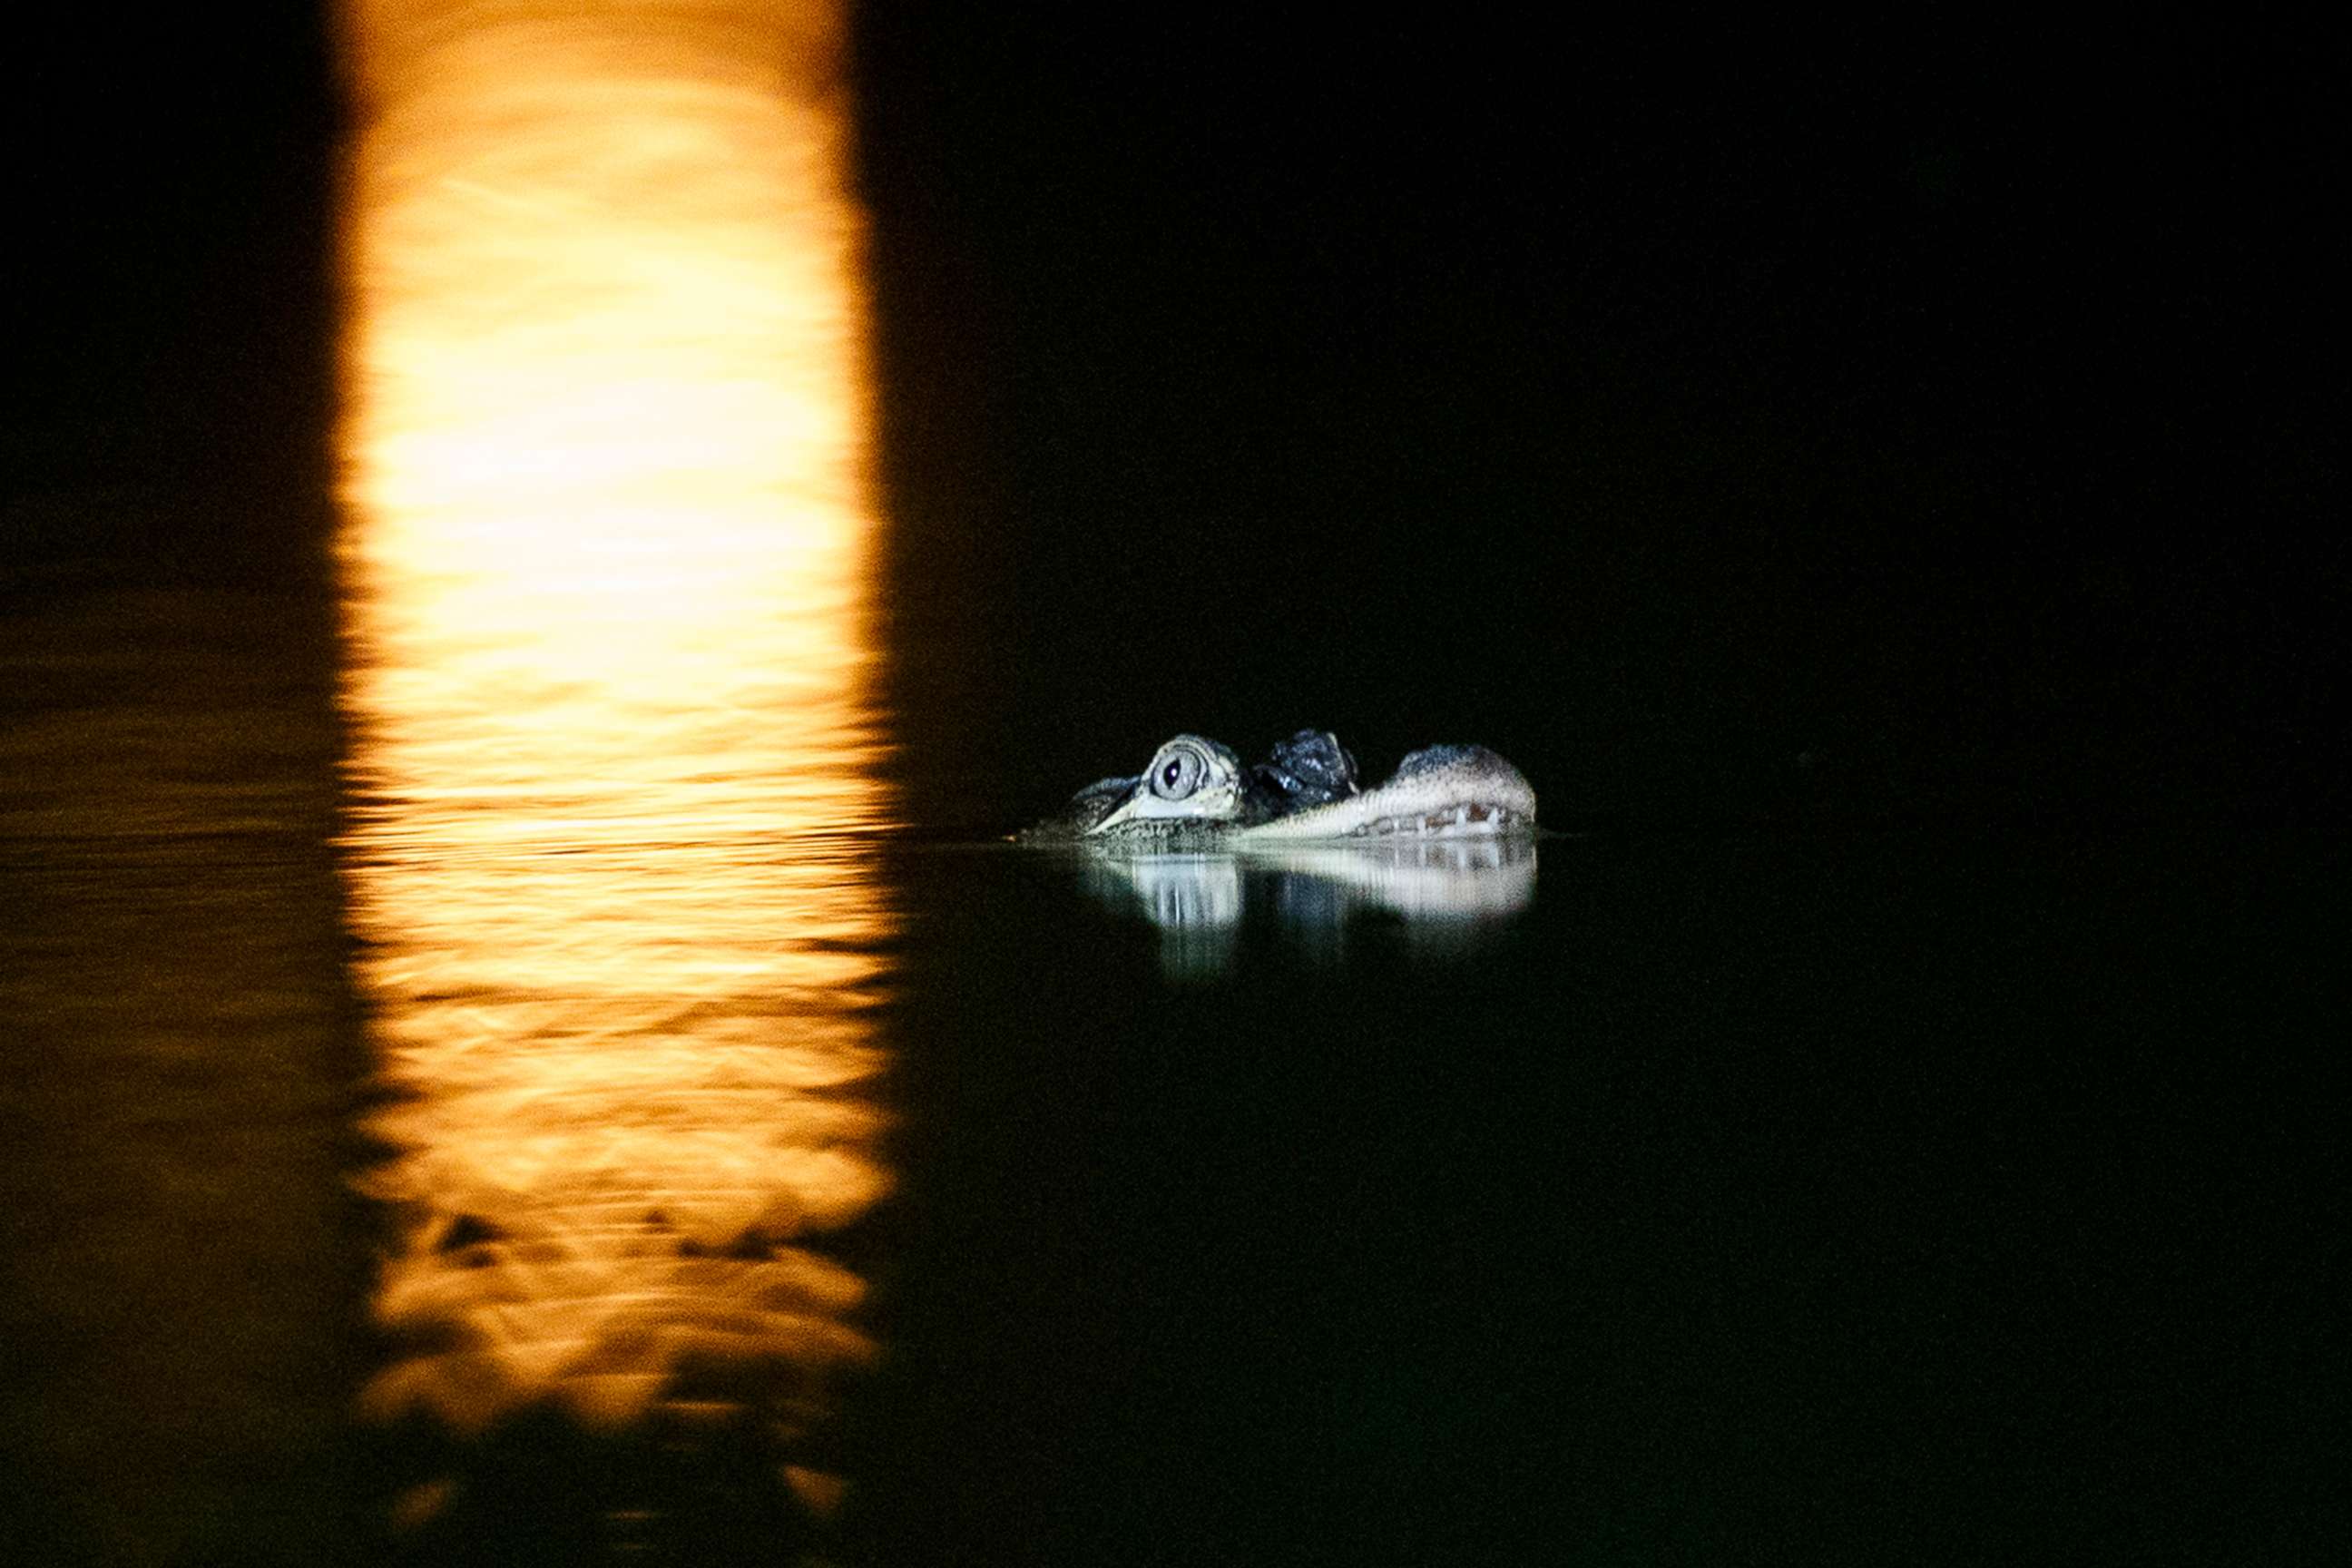 PHOTO: An alligator floats in the Humboldt Park Lagoon on July 9, 2019, in Chicago.